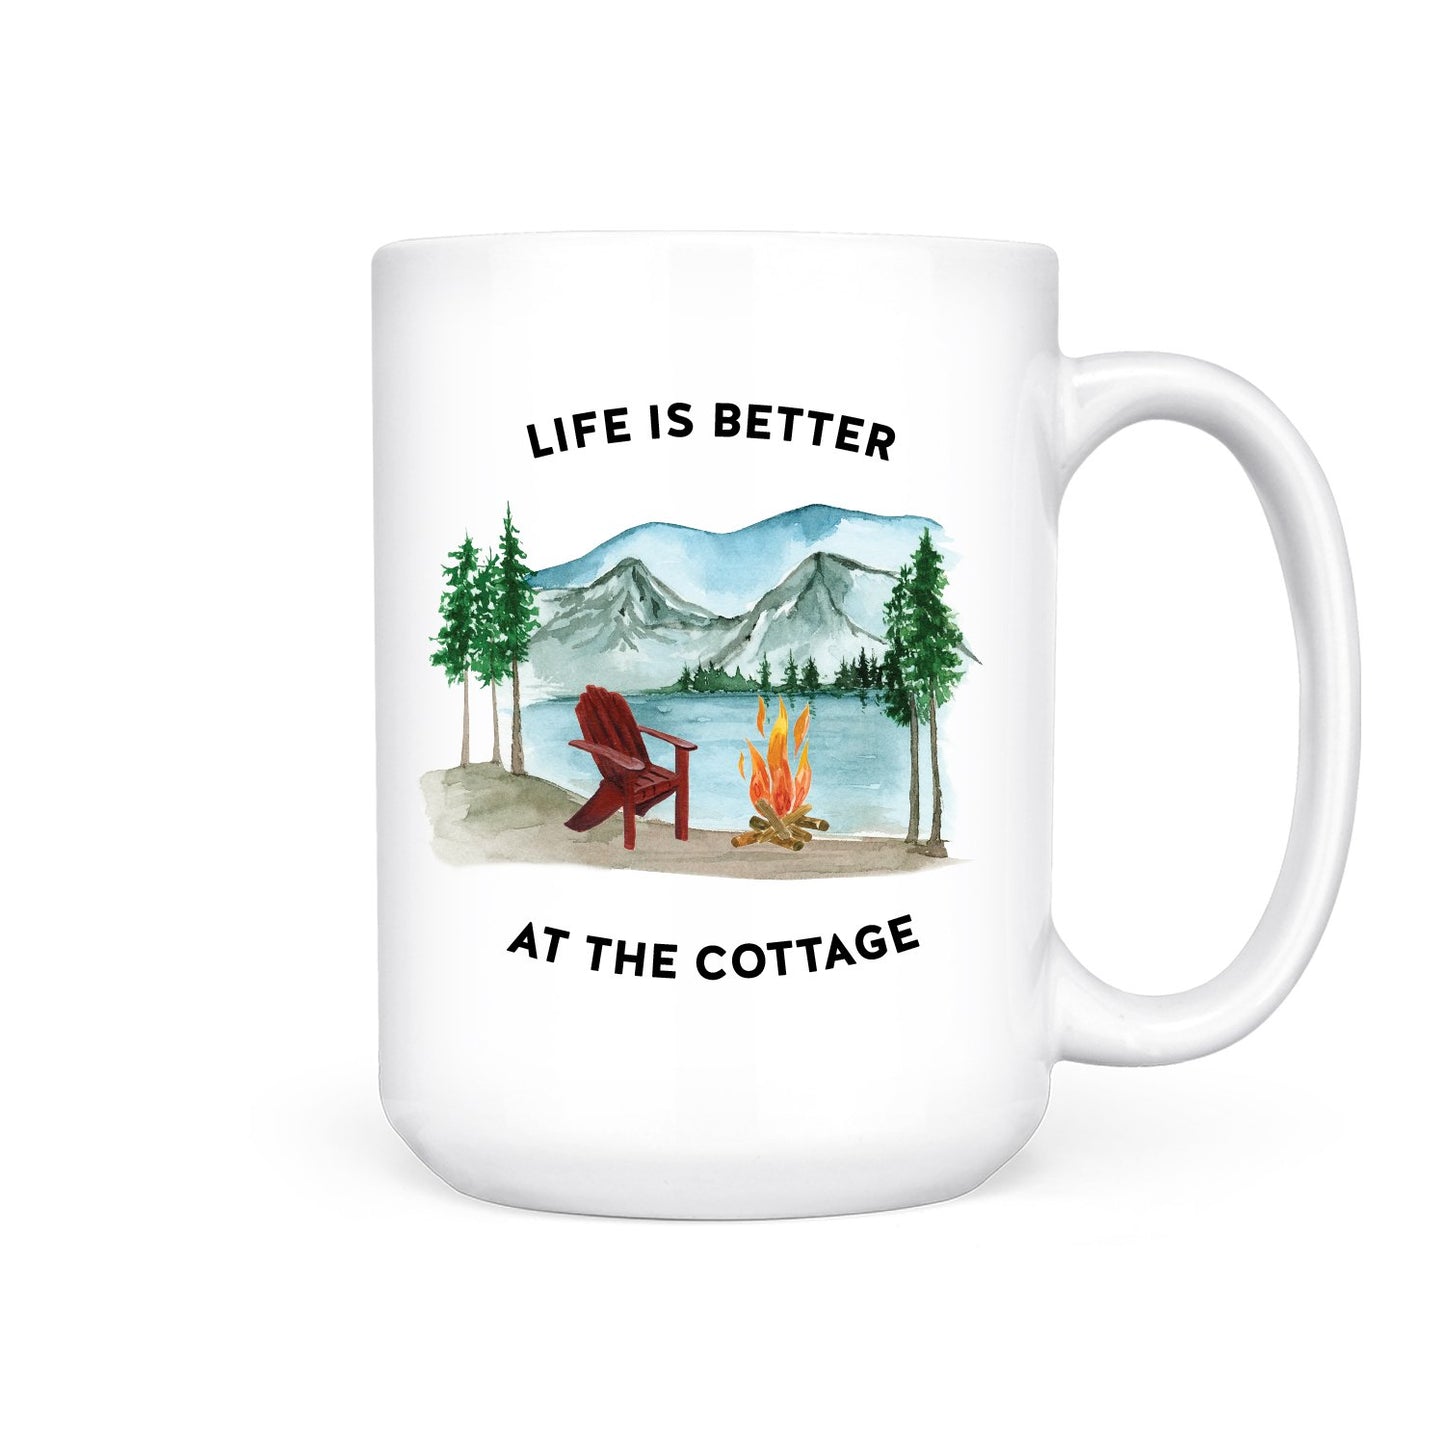 LIFE IS BETTER AT THE COTTAGE | MUG